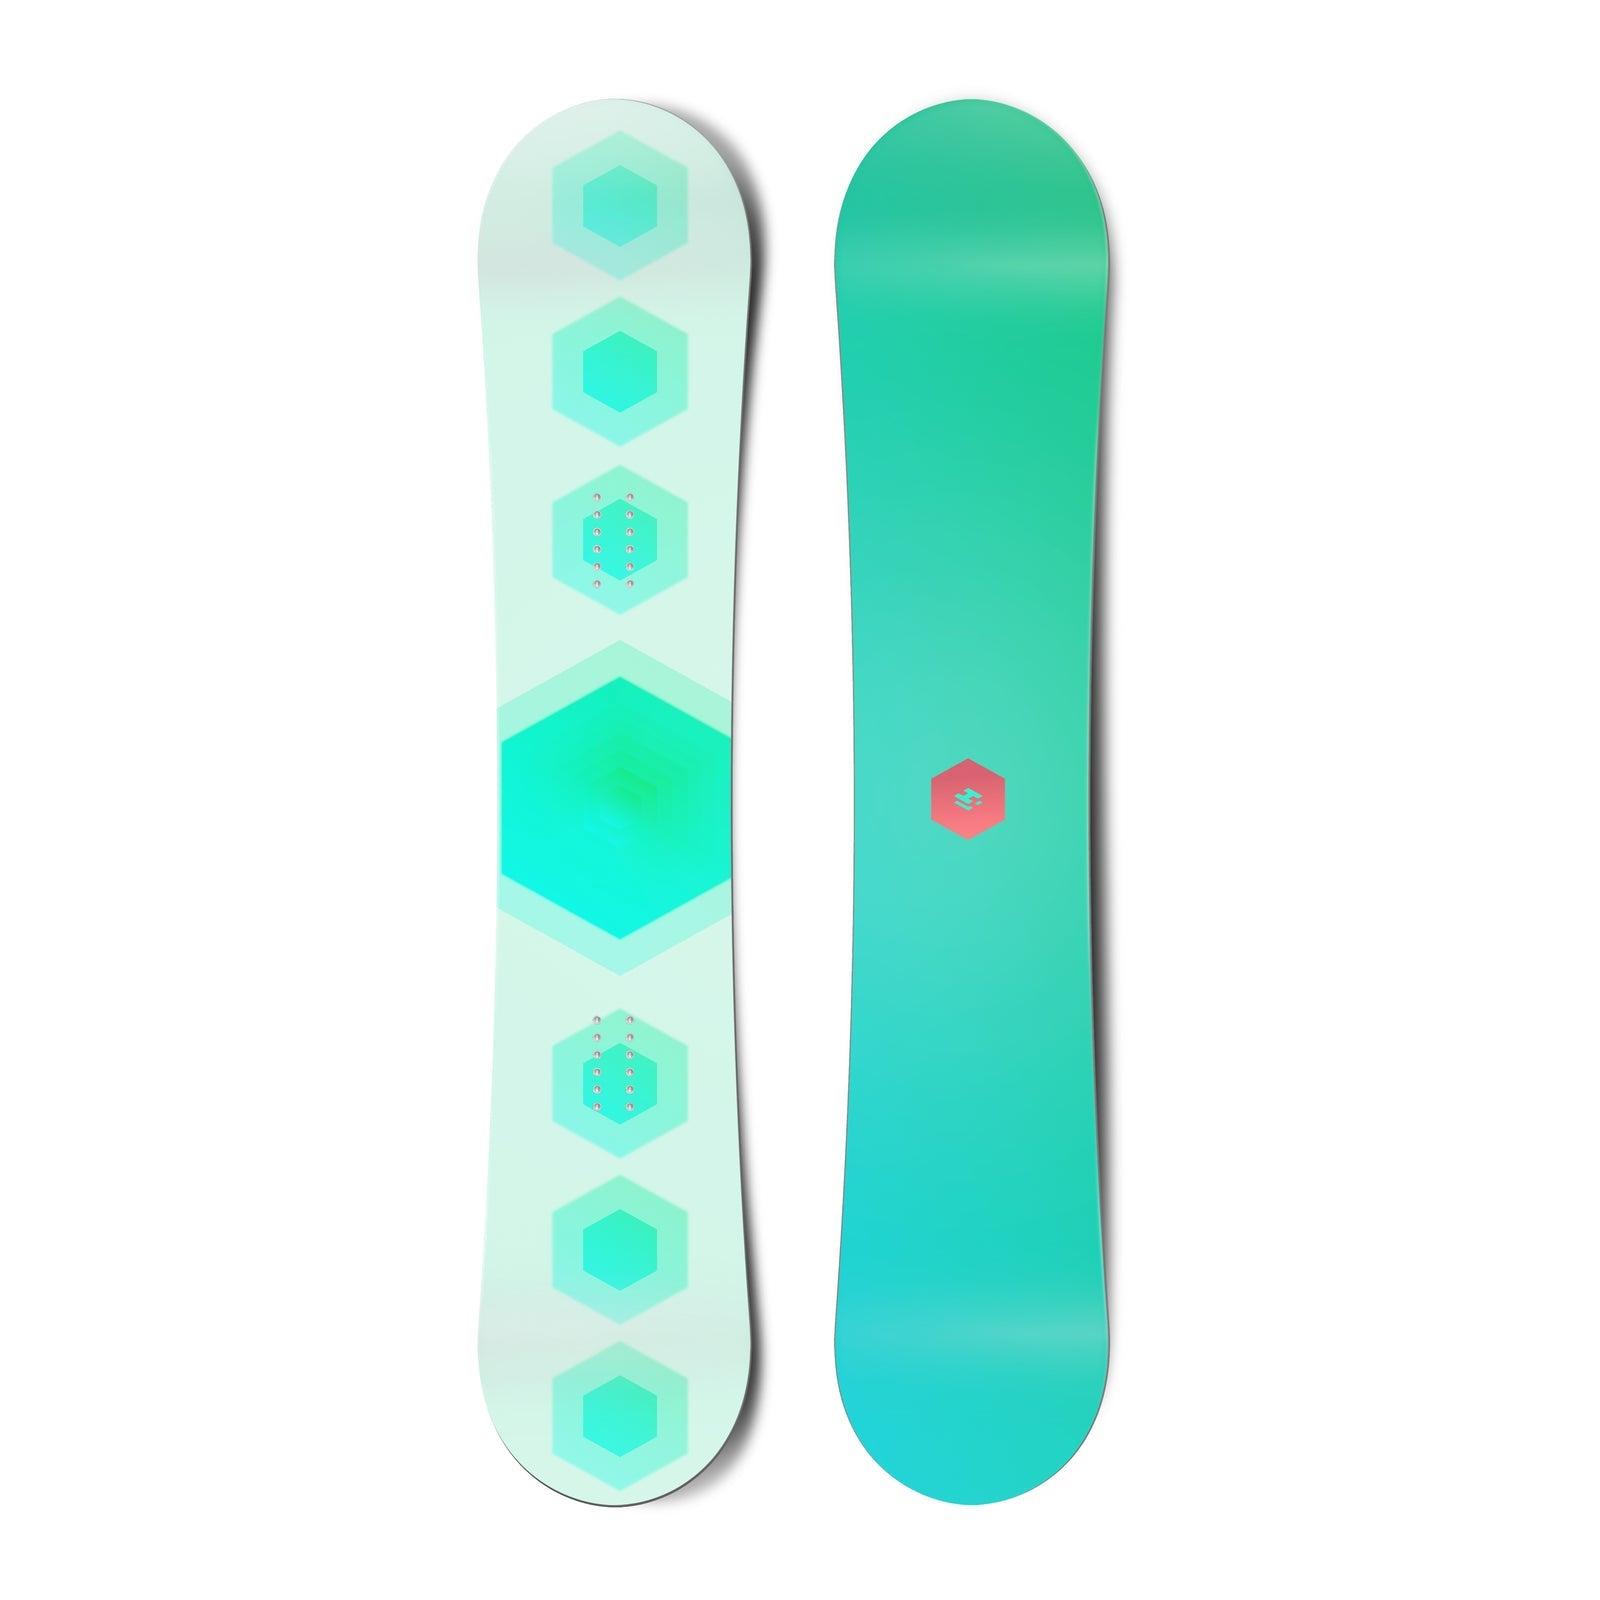 Top and bottom view of a snowboard. The top view shows 7 stacked hexagons and the bottom view shows
          a small, centred hexagonal logo for Hydrogen.